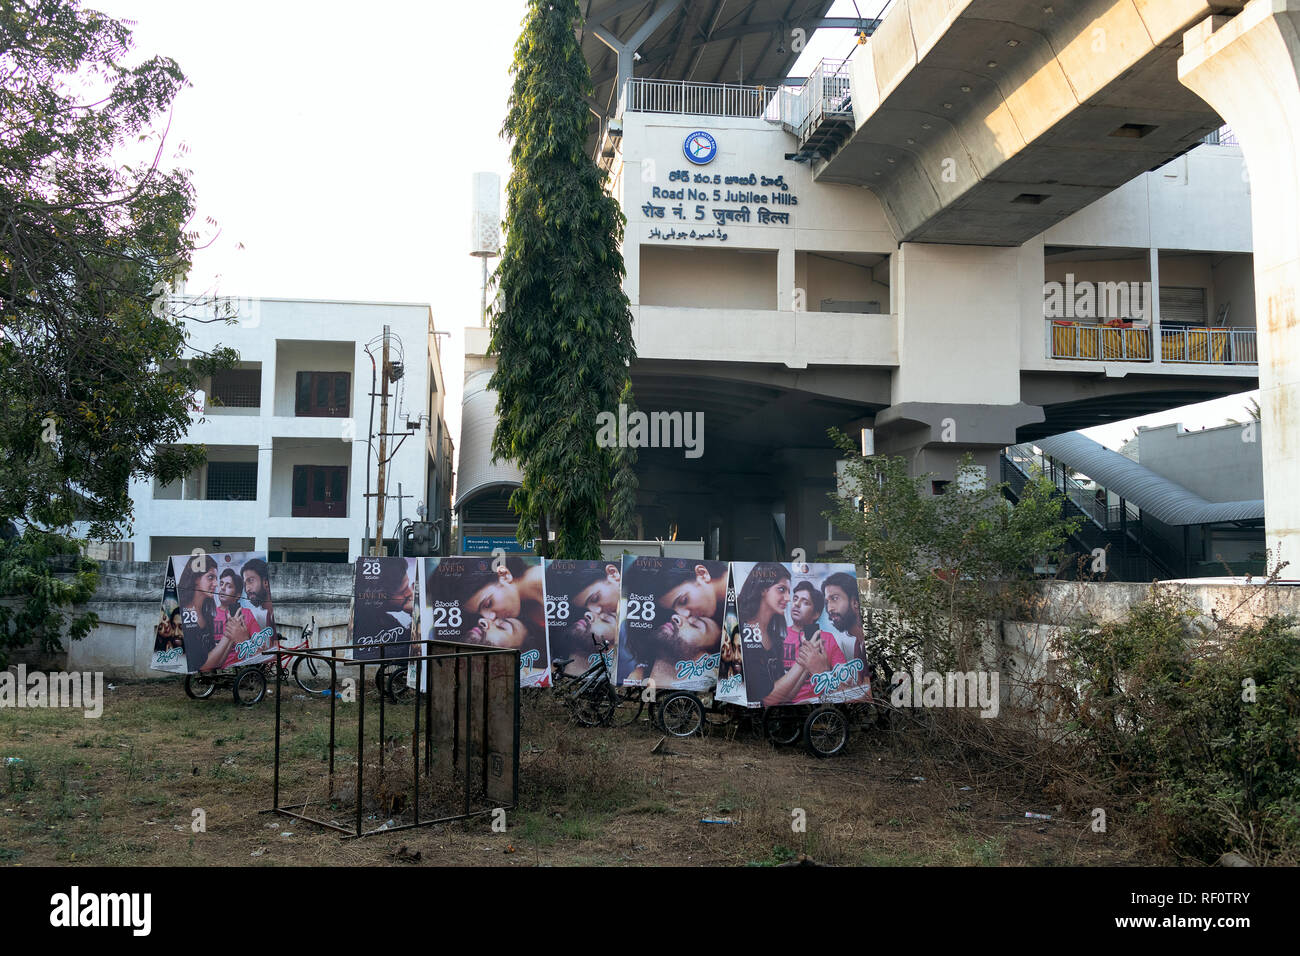 23 January 2019,Hyderabad,India.Tollywood cinema posters on a rickshaw in the foreground at Rd No 5 Jubilee Hills Metro Station in Hyderabad,India Stock Photo